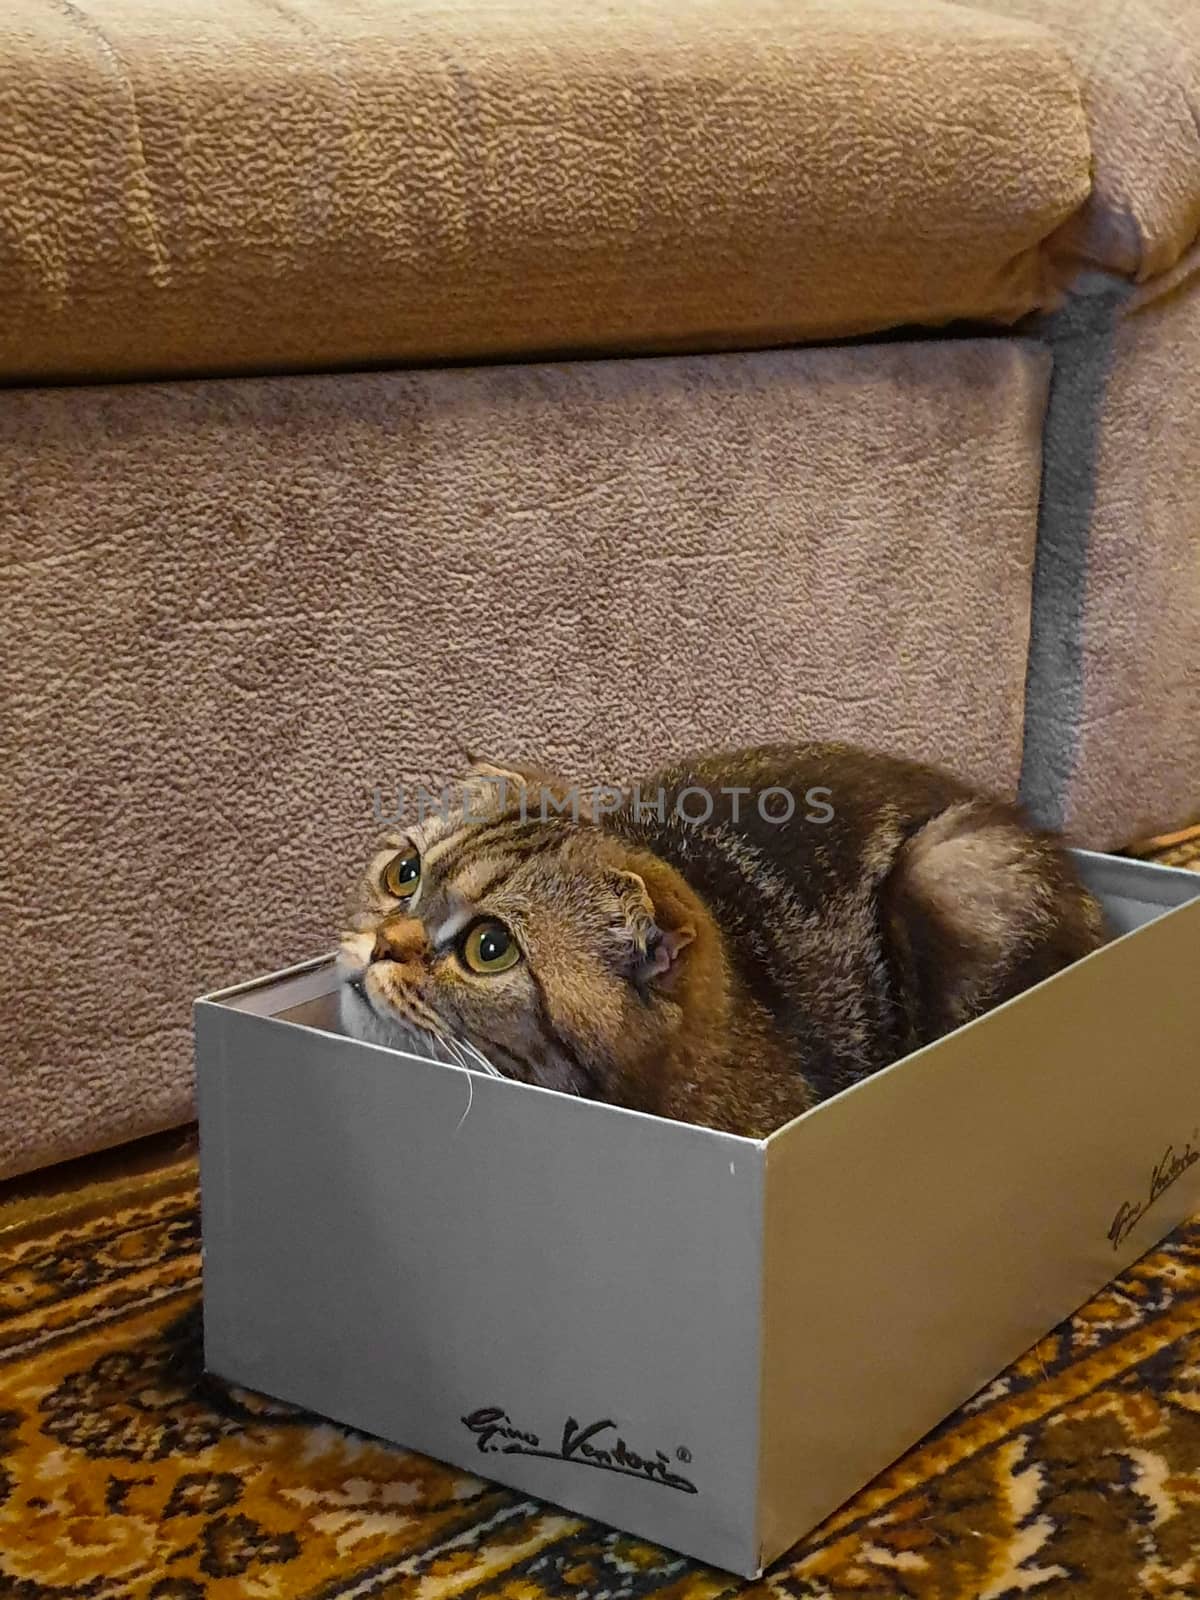 THERE IS A CUTE CAT INSIDE OF THE SHOE BOX by tomarencibia